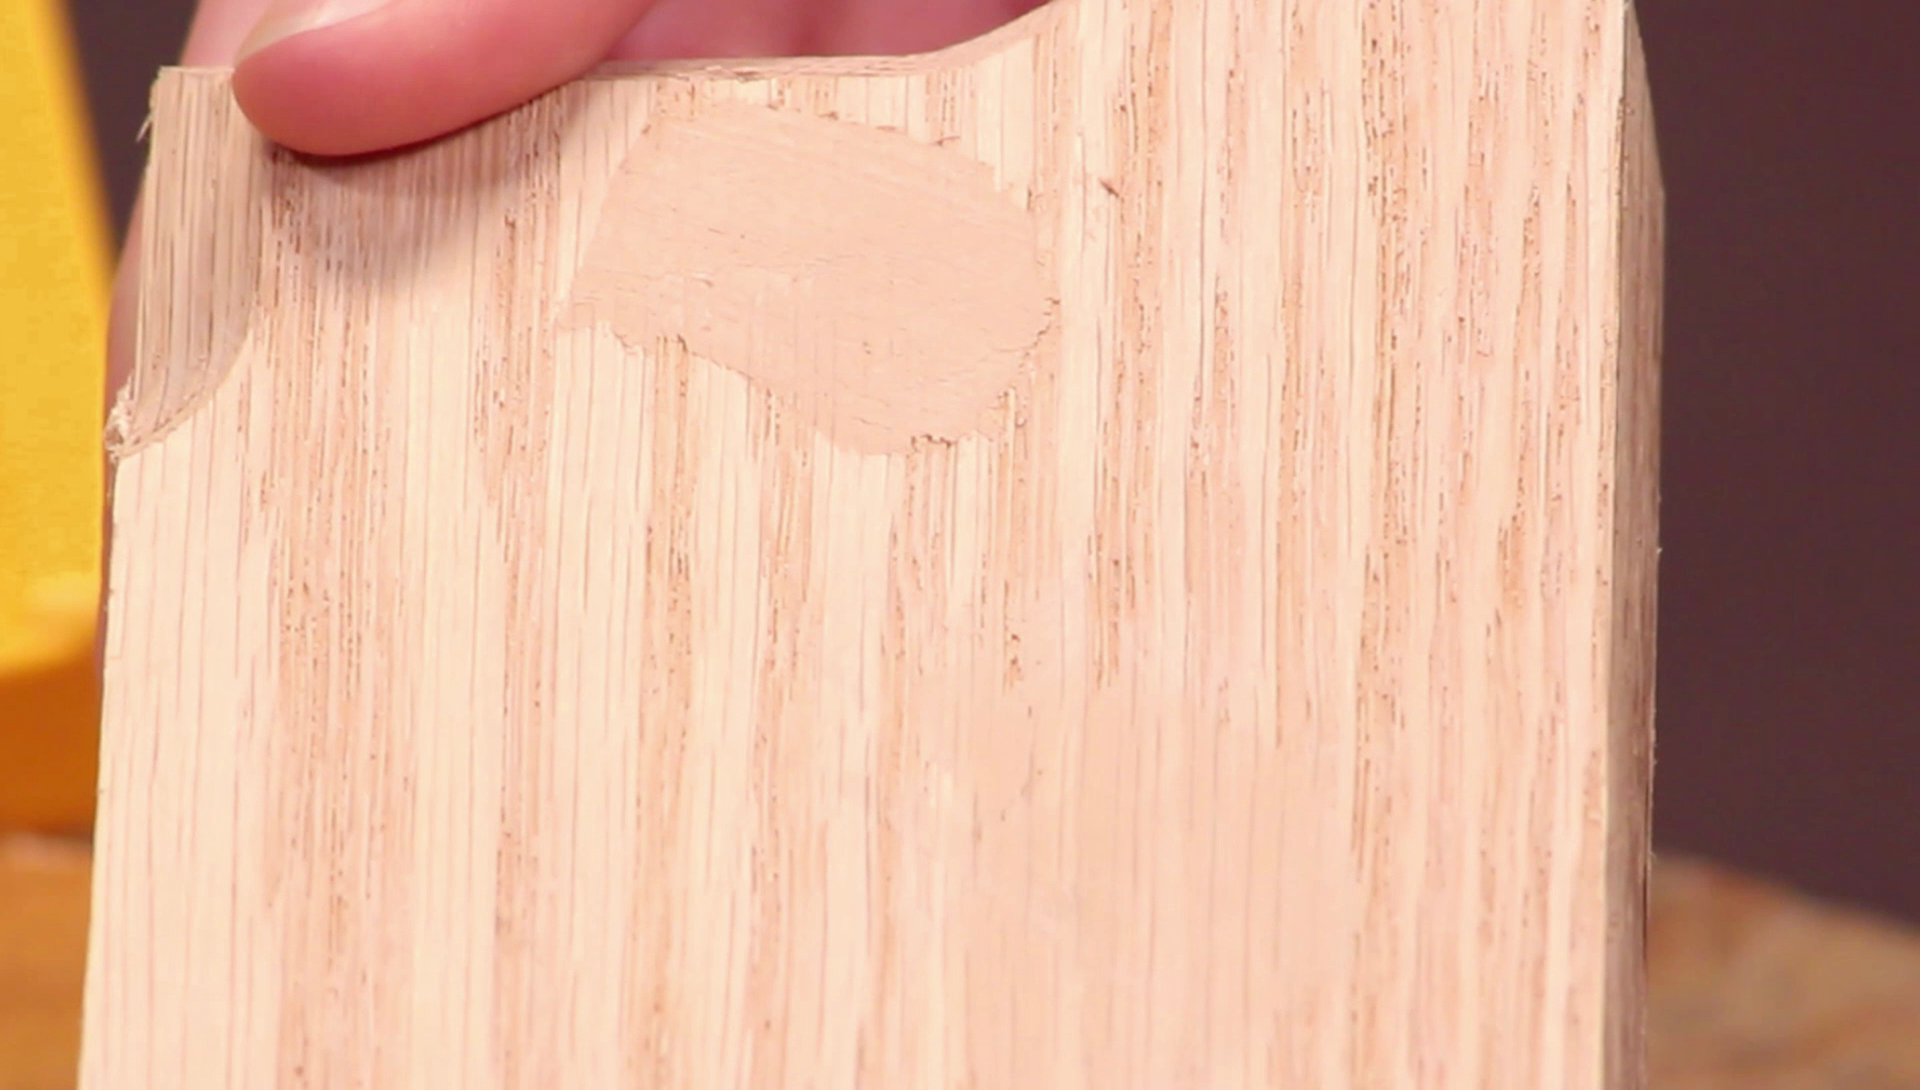 How to stain wood filler: tips and tricks